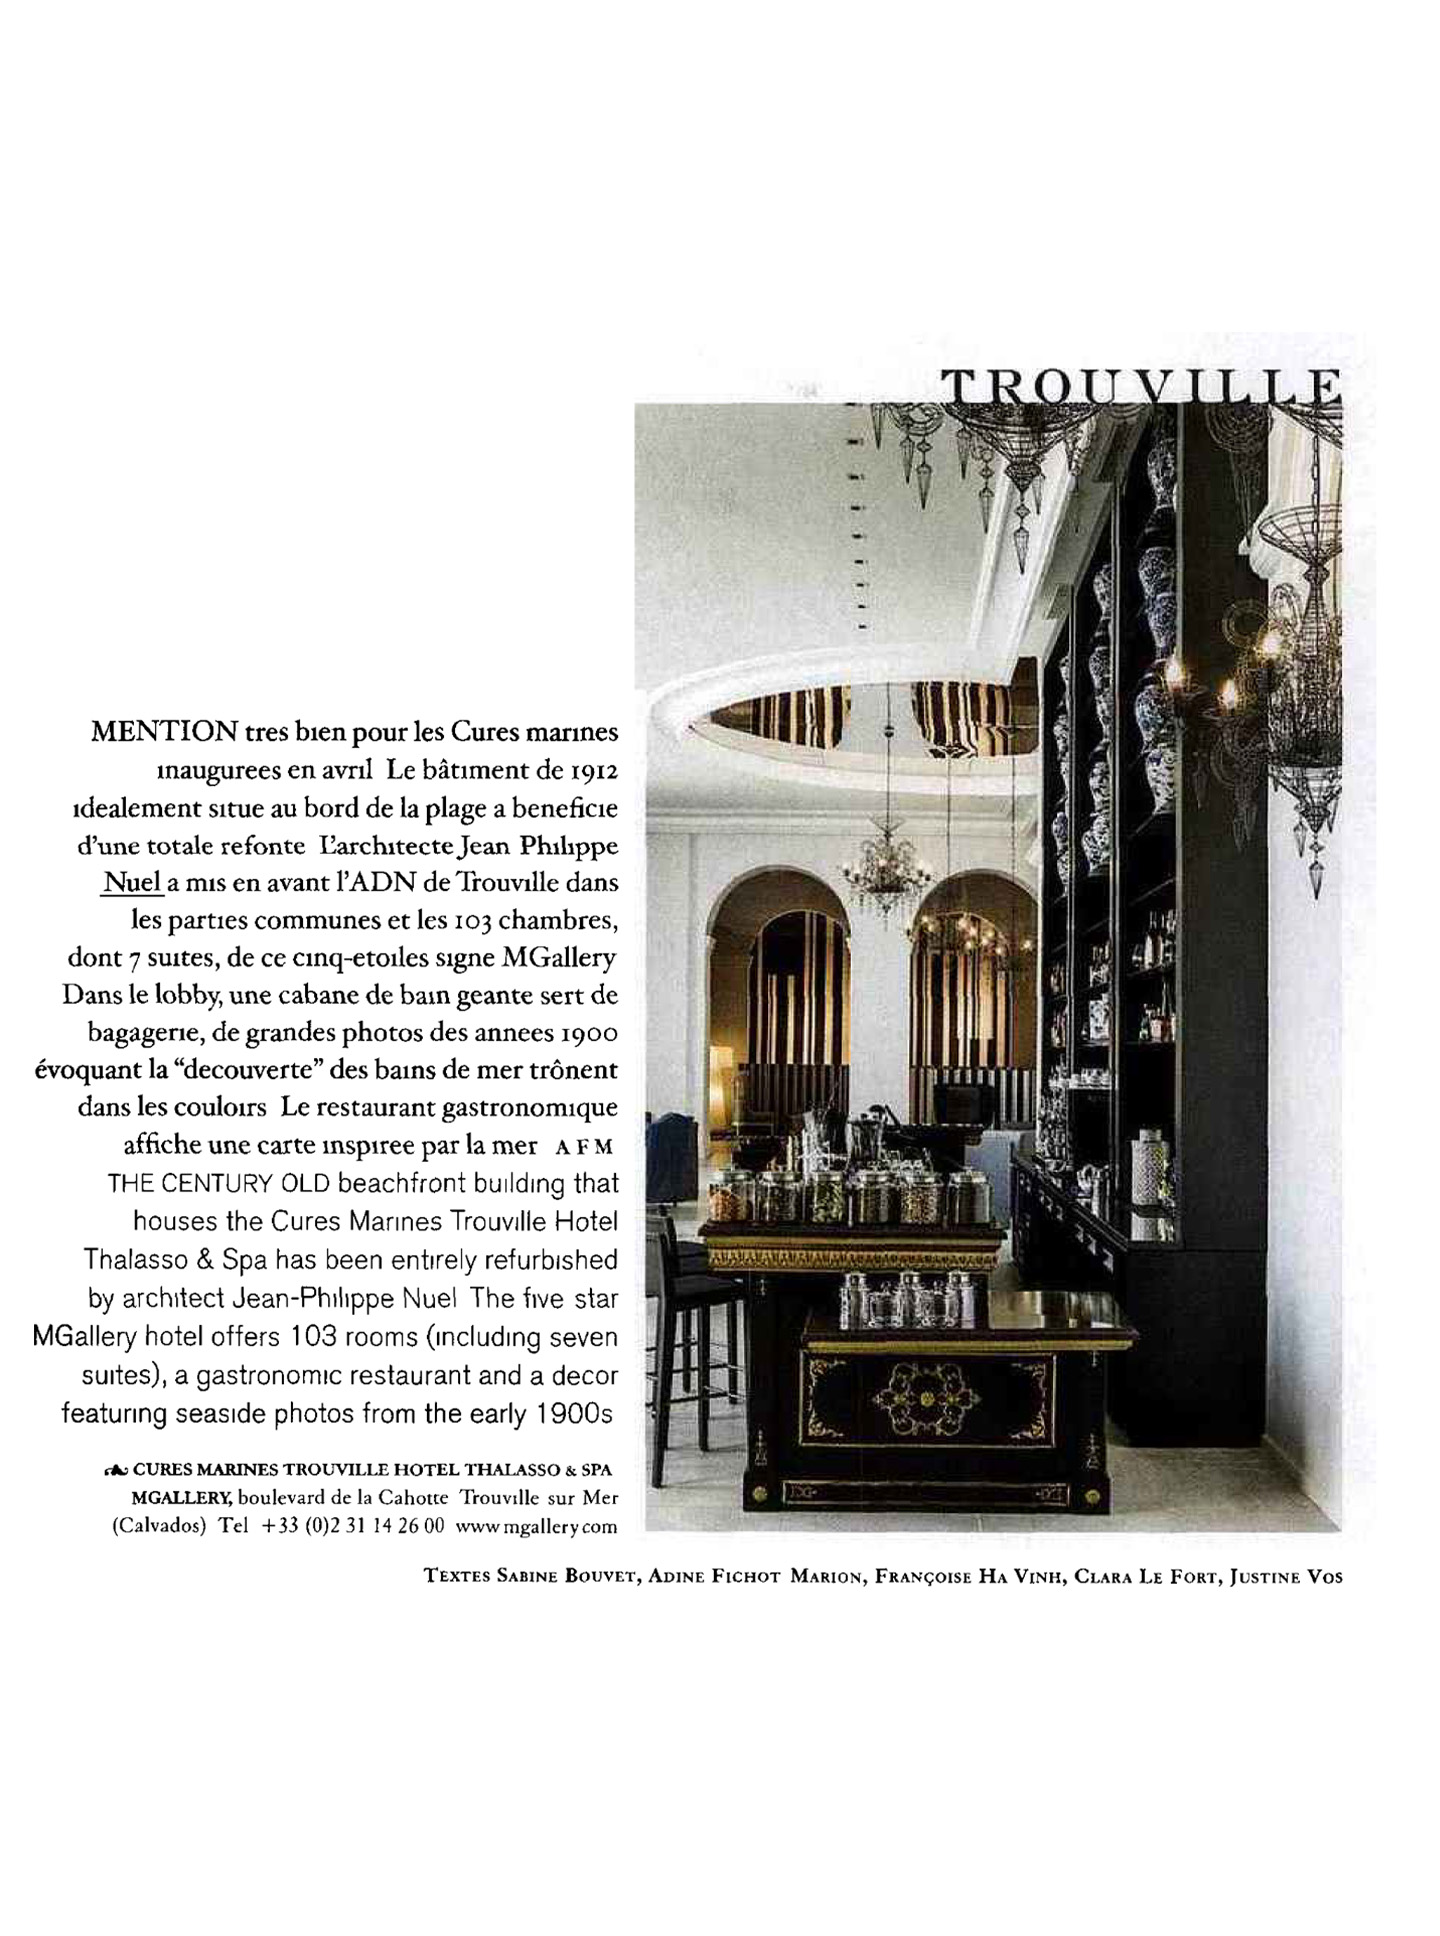 article on the cures marines de trouville, luxury hotel & spa by the interior design studio jean-philippe nuel, published in the magazine air france madame